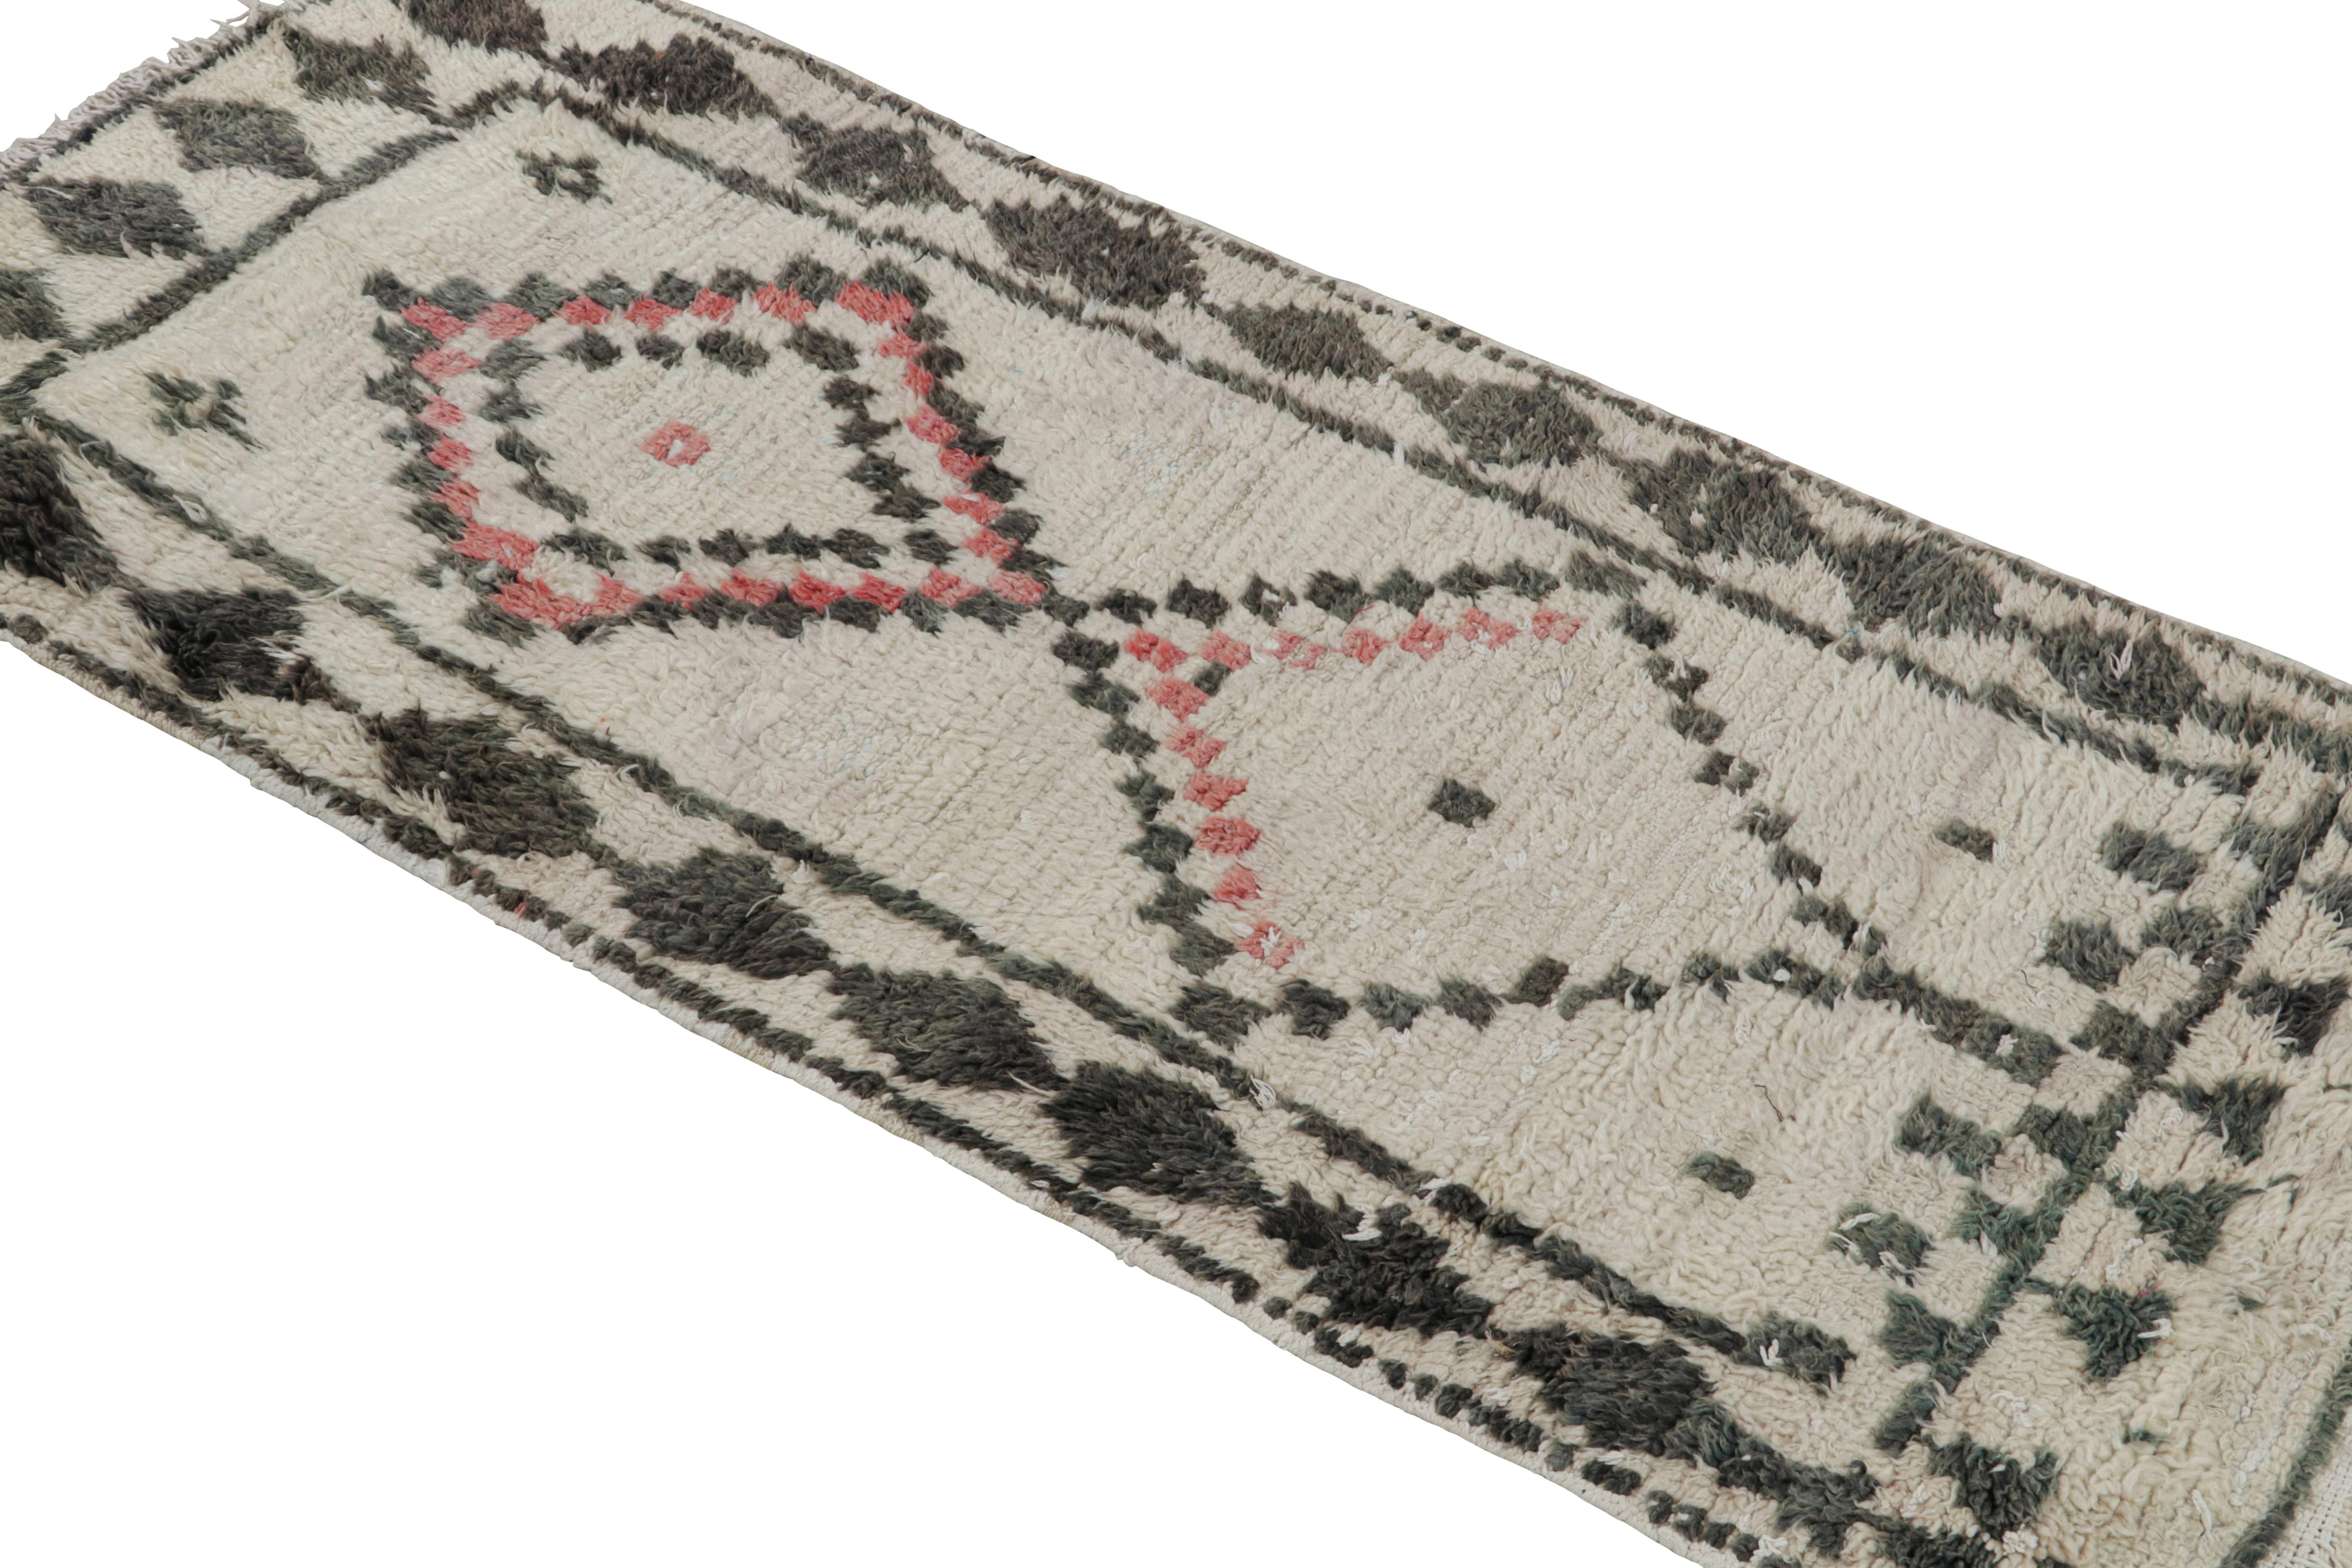 Hand-knotted in wool circa 1950-1960, this vintage 2x6 Moroccan rug is believed to hail from the Azilal tribe. 

On the Design: 

This rug enjoys red and black diamond patterns on a white background. Keen eyes will further admire its healthy